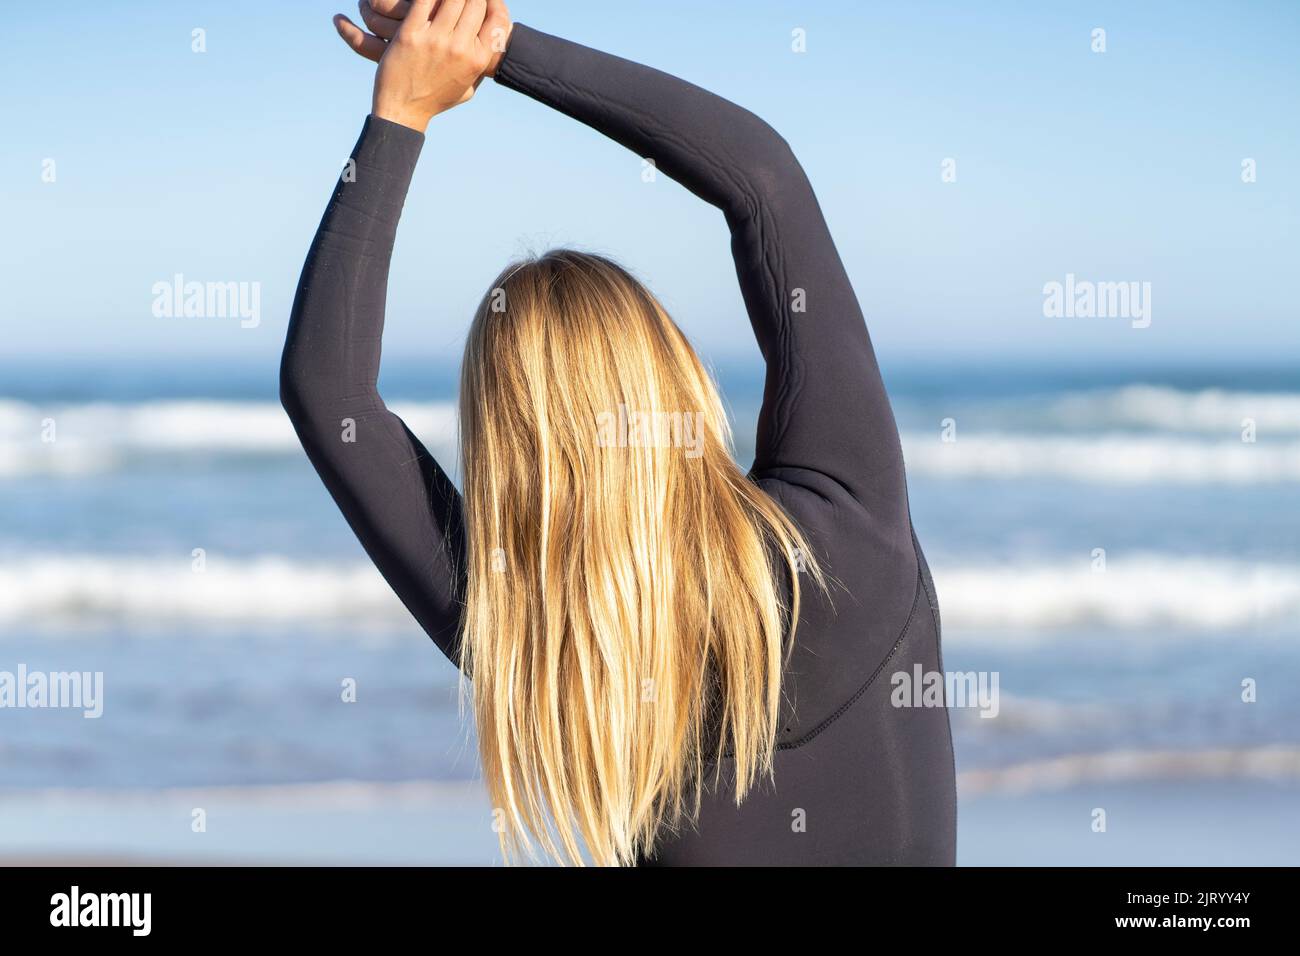 Surfer warming up at the beach in the morning before surf. Stock Photo